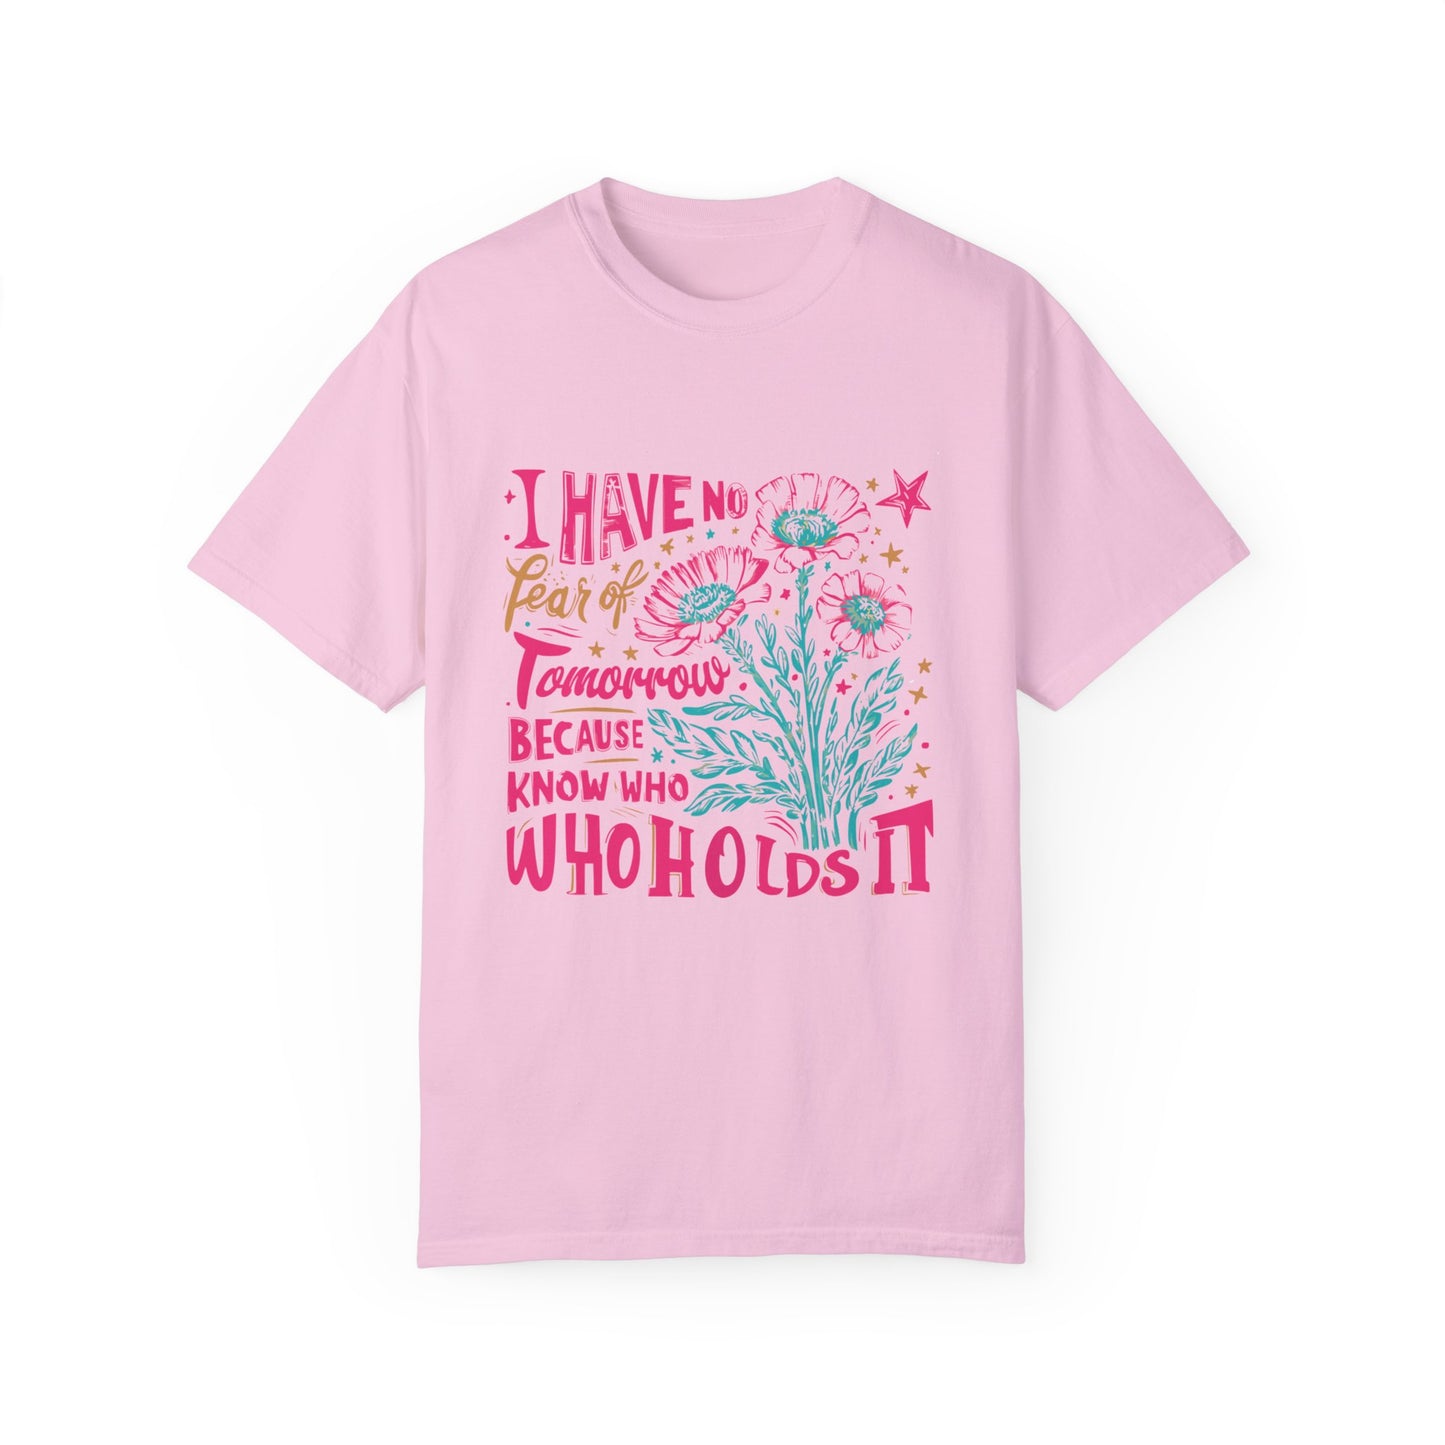 I have no fear of tomorrow Unisex Garment-Dyed T-shirt